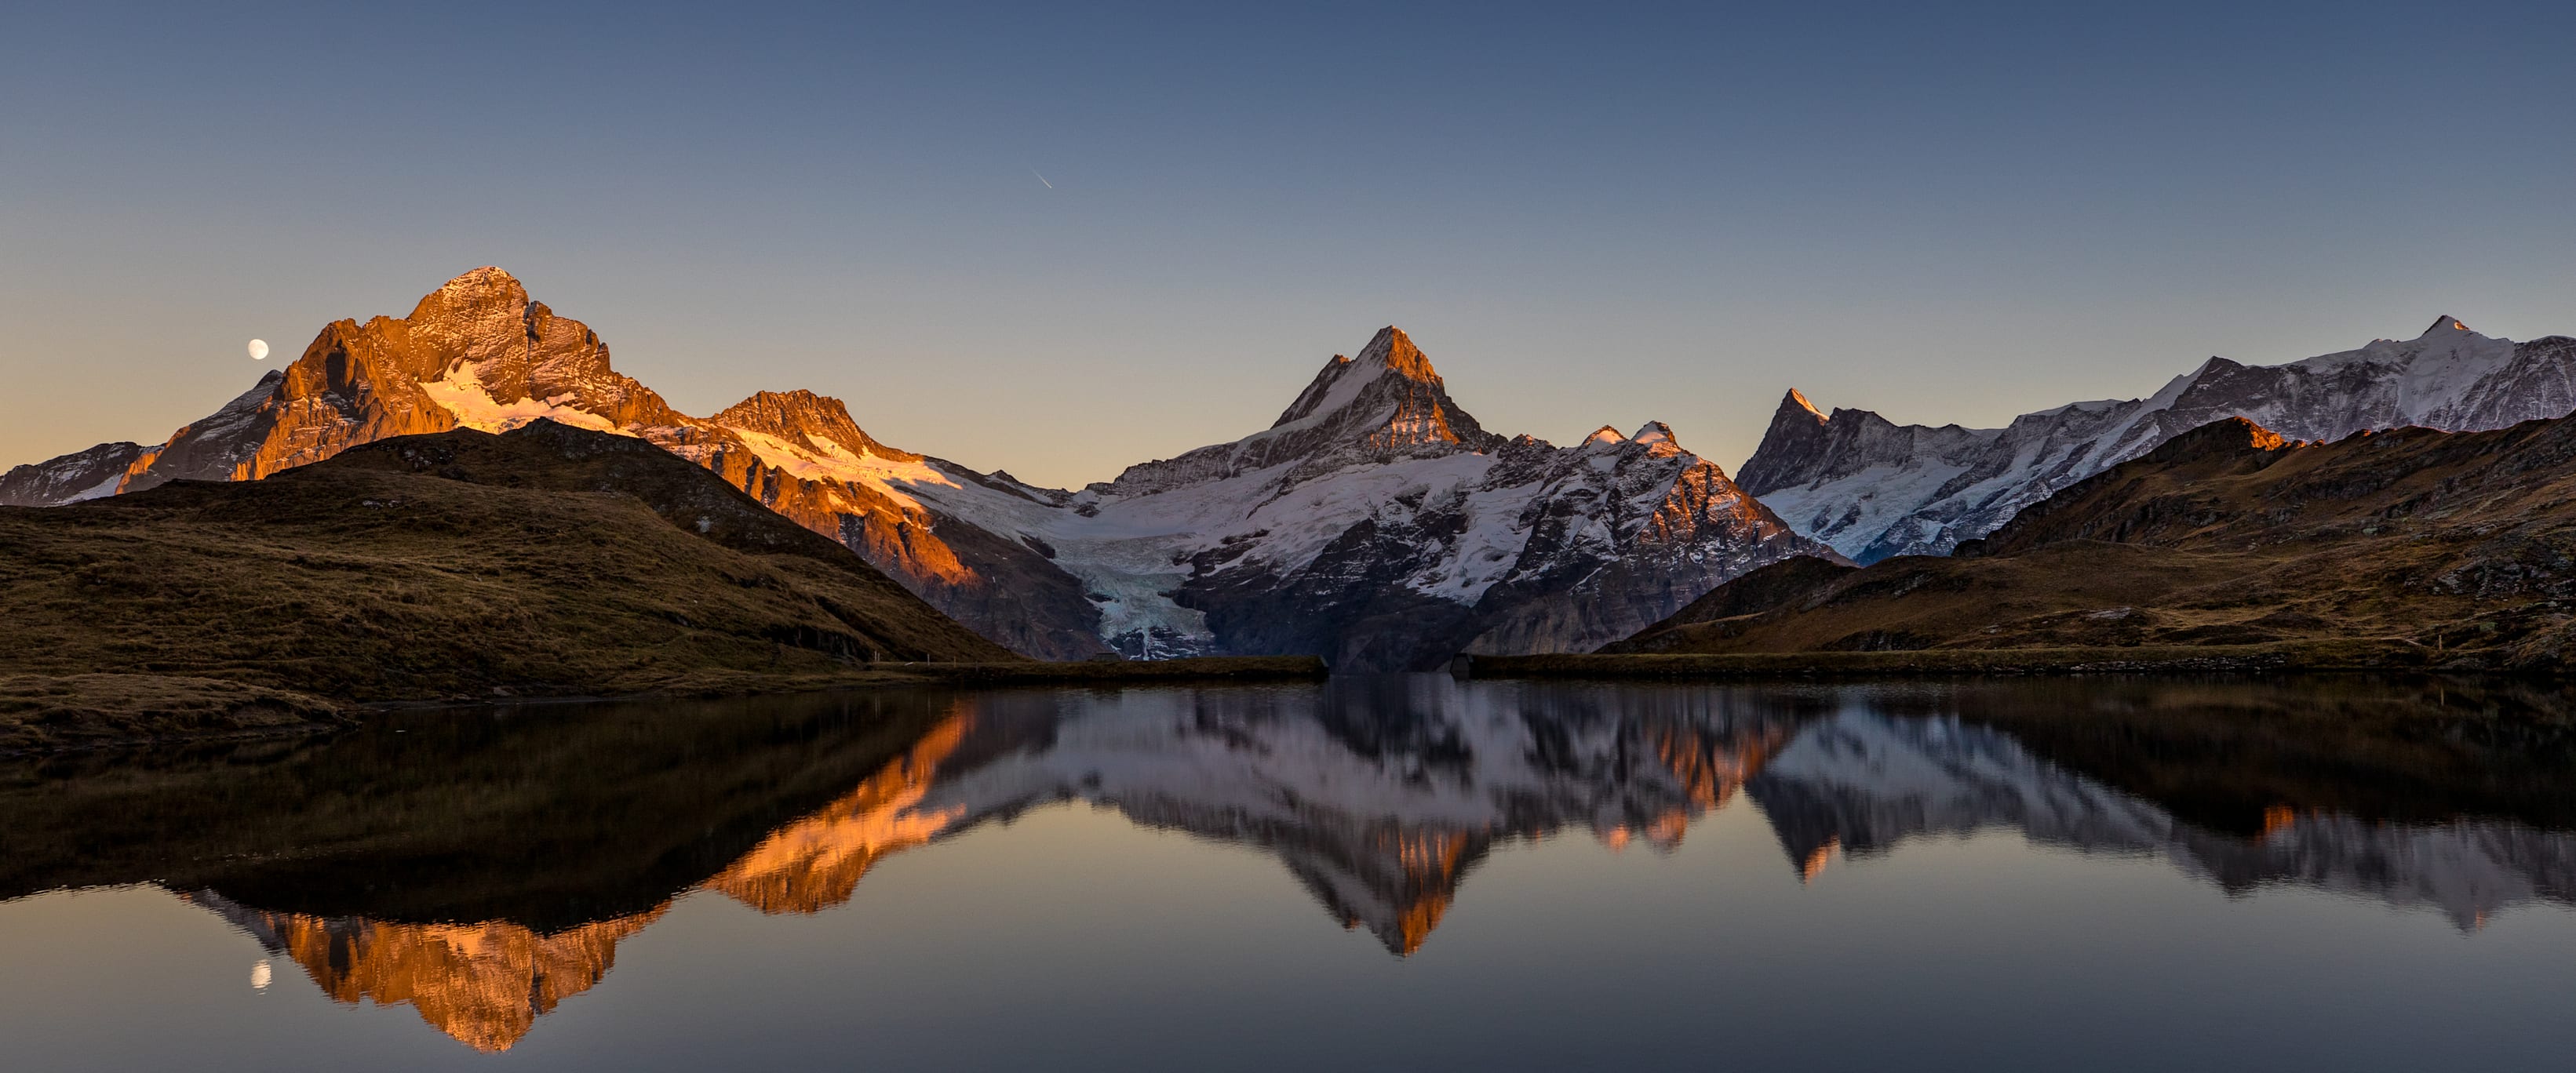 Evening-Morning Mood, Offers, Lake Bachalpsee, Experiences-Activities, Grindelwald-First-Summer, Season, Jungfrau-Travel-Pass, Summer, Conditions, jungfrau.ch